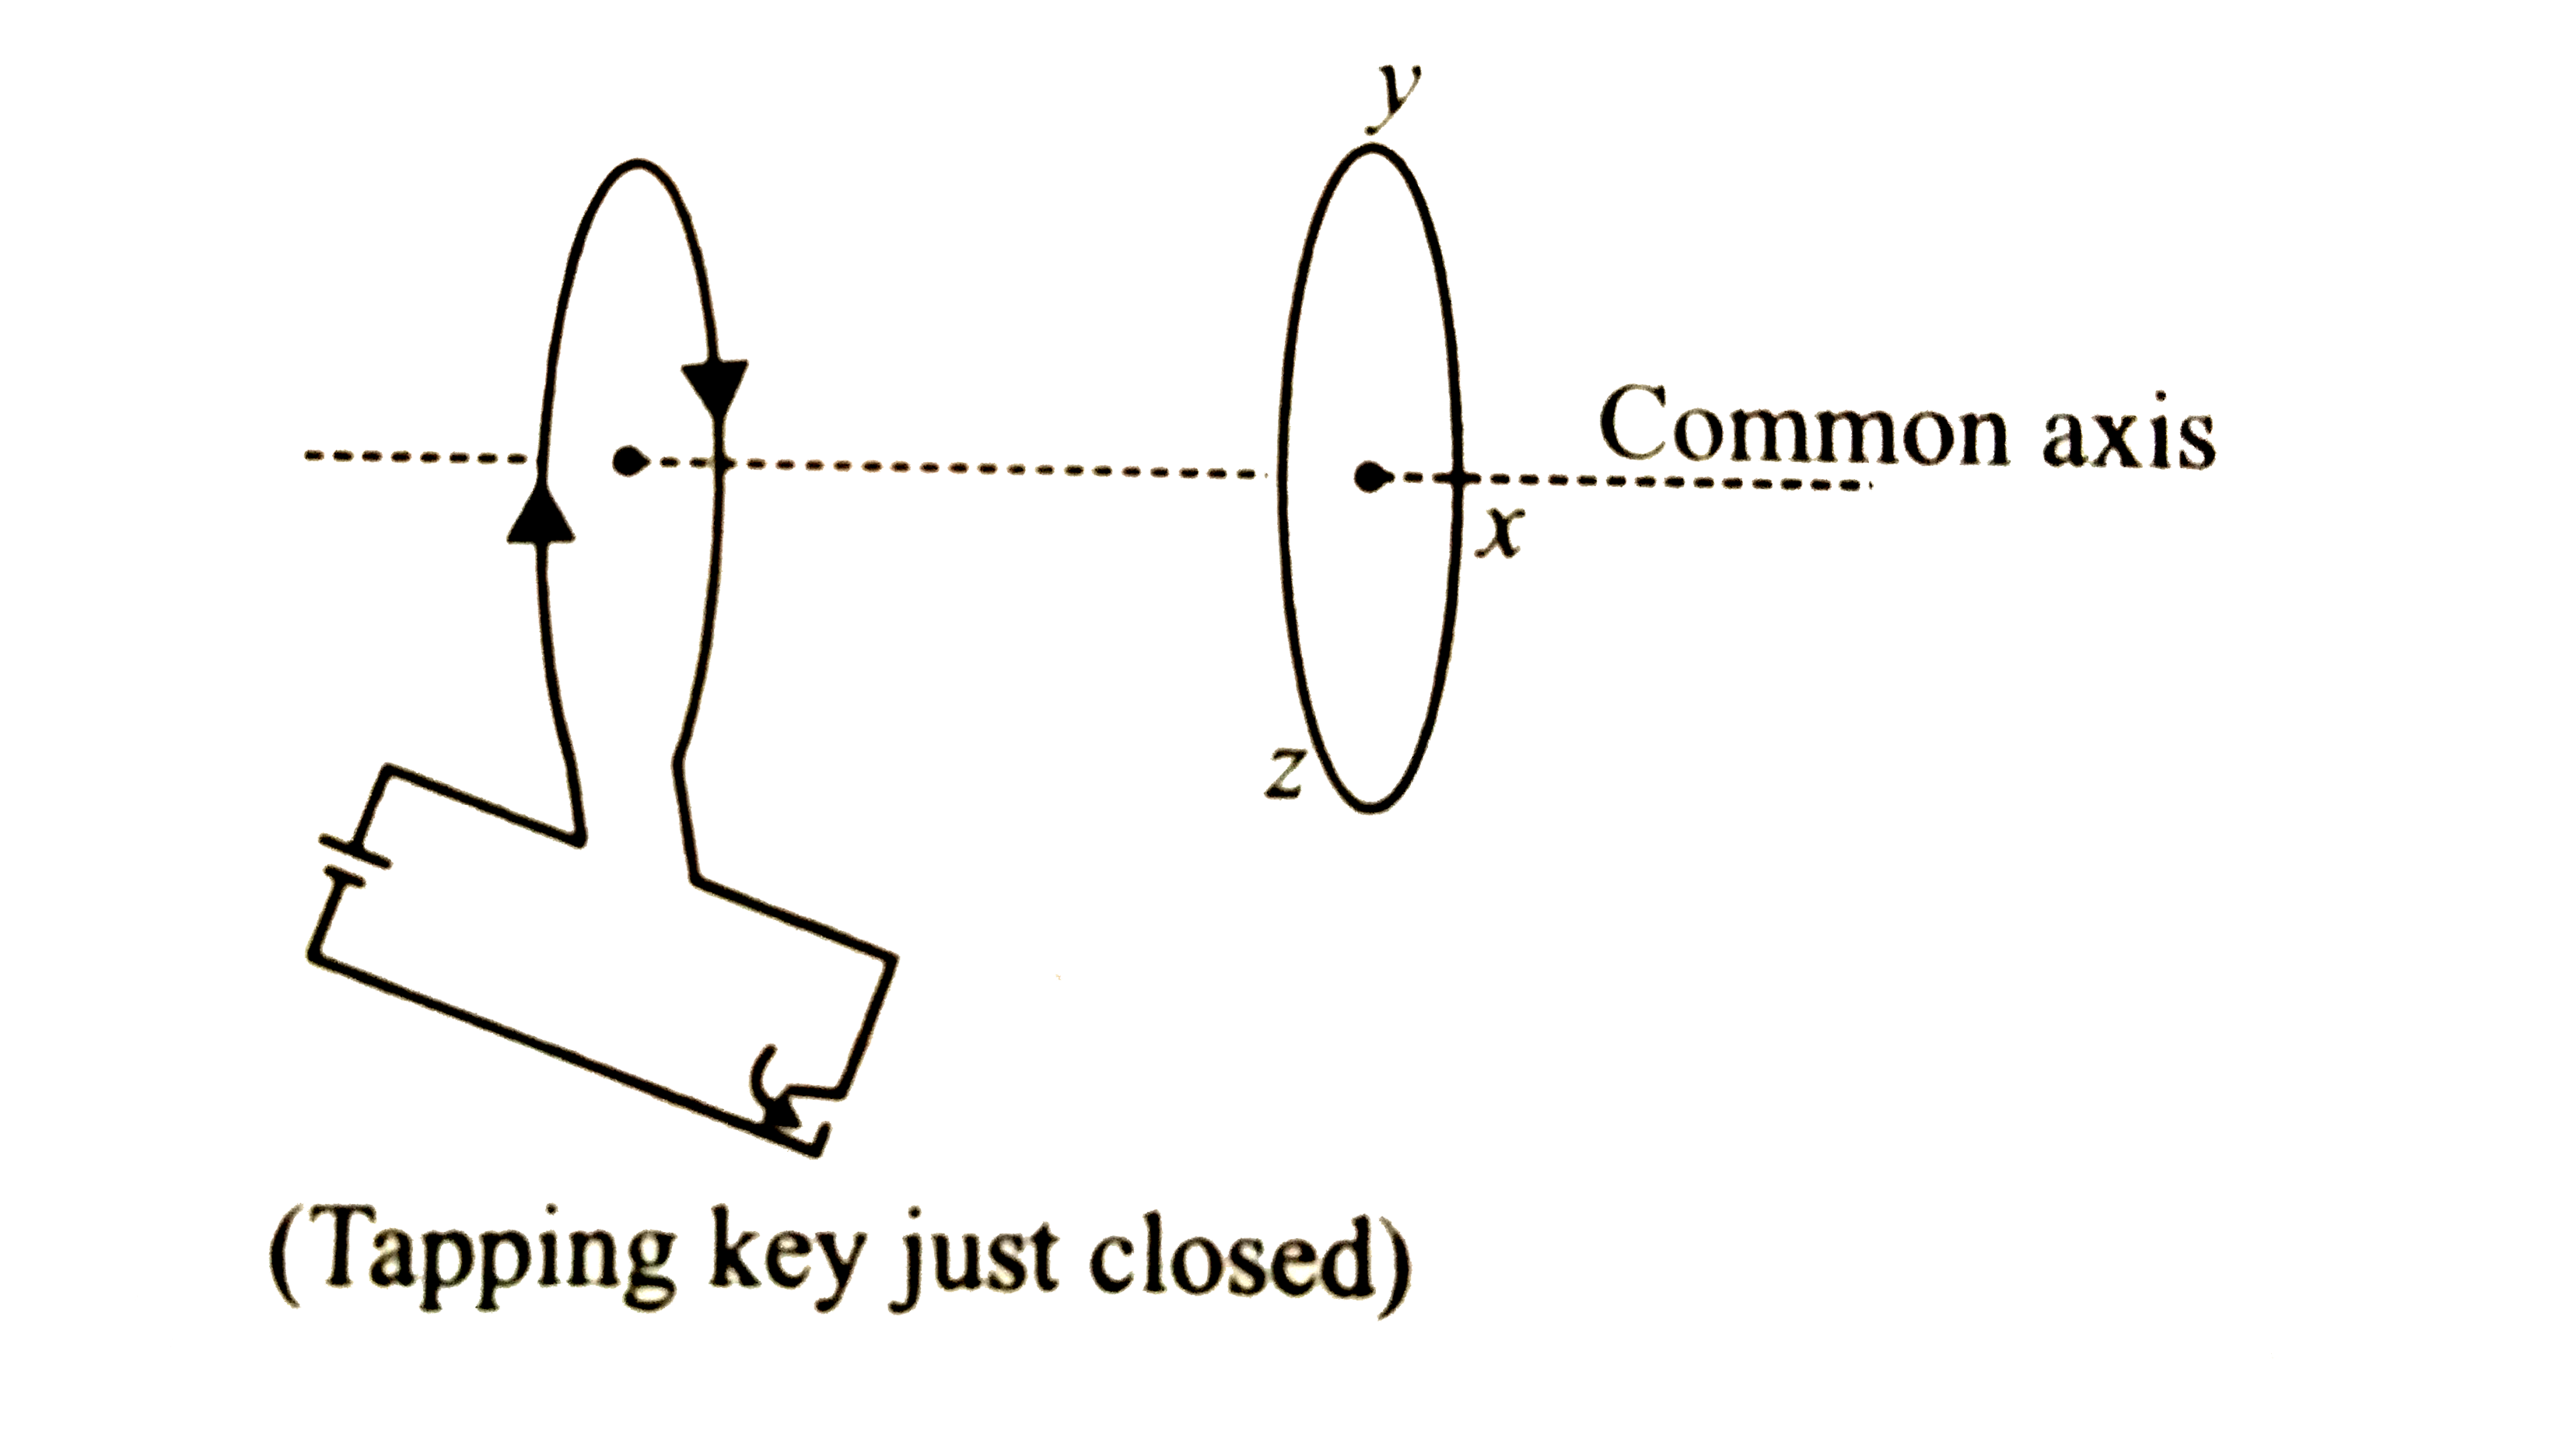 The direction of induced currnet in the right loop in the situation shown by the given figure is